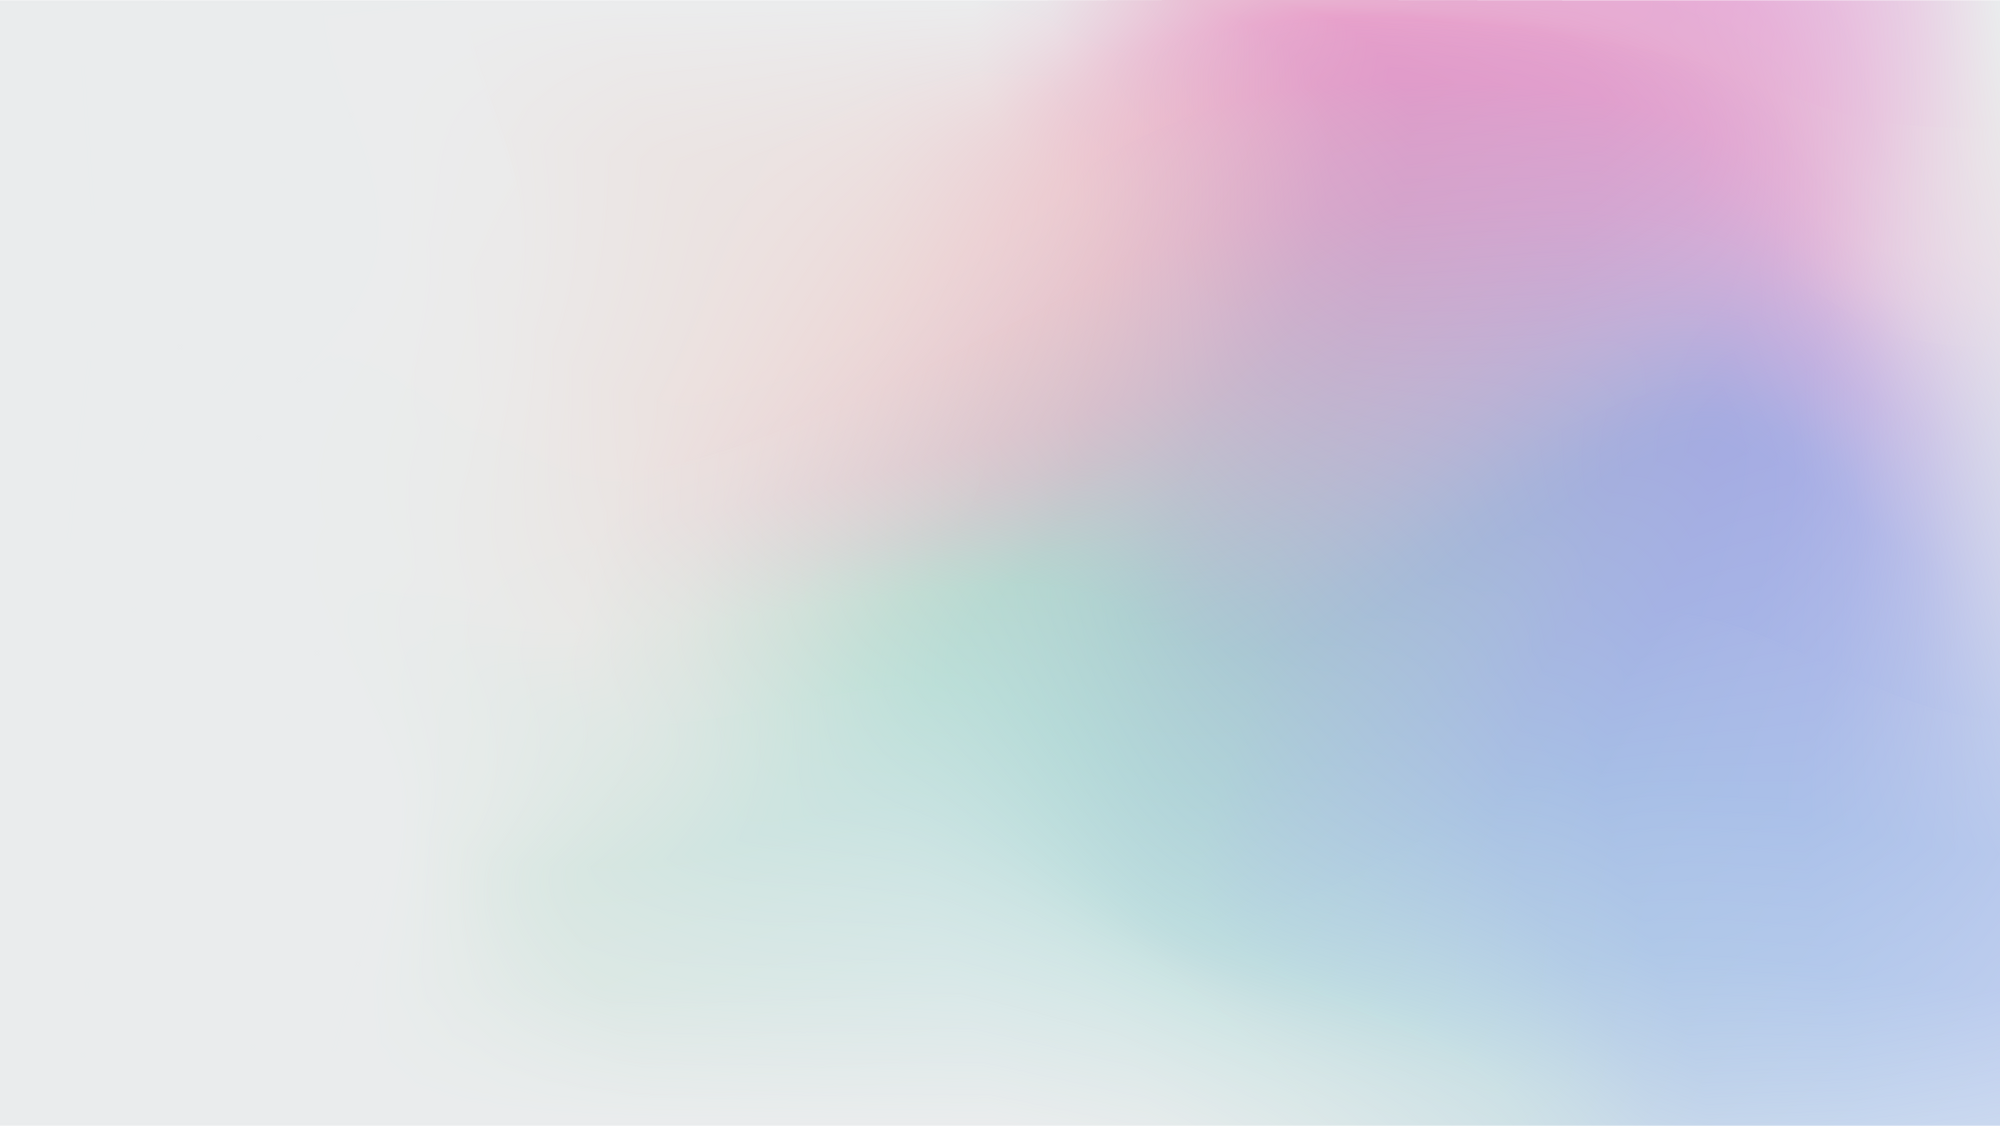 Pastel mesh gradient background. Abstract blurred wallpaper texture